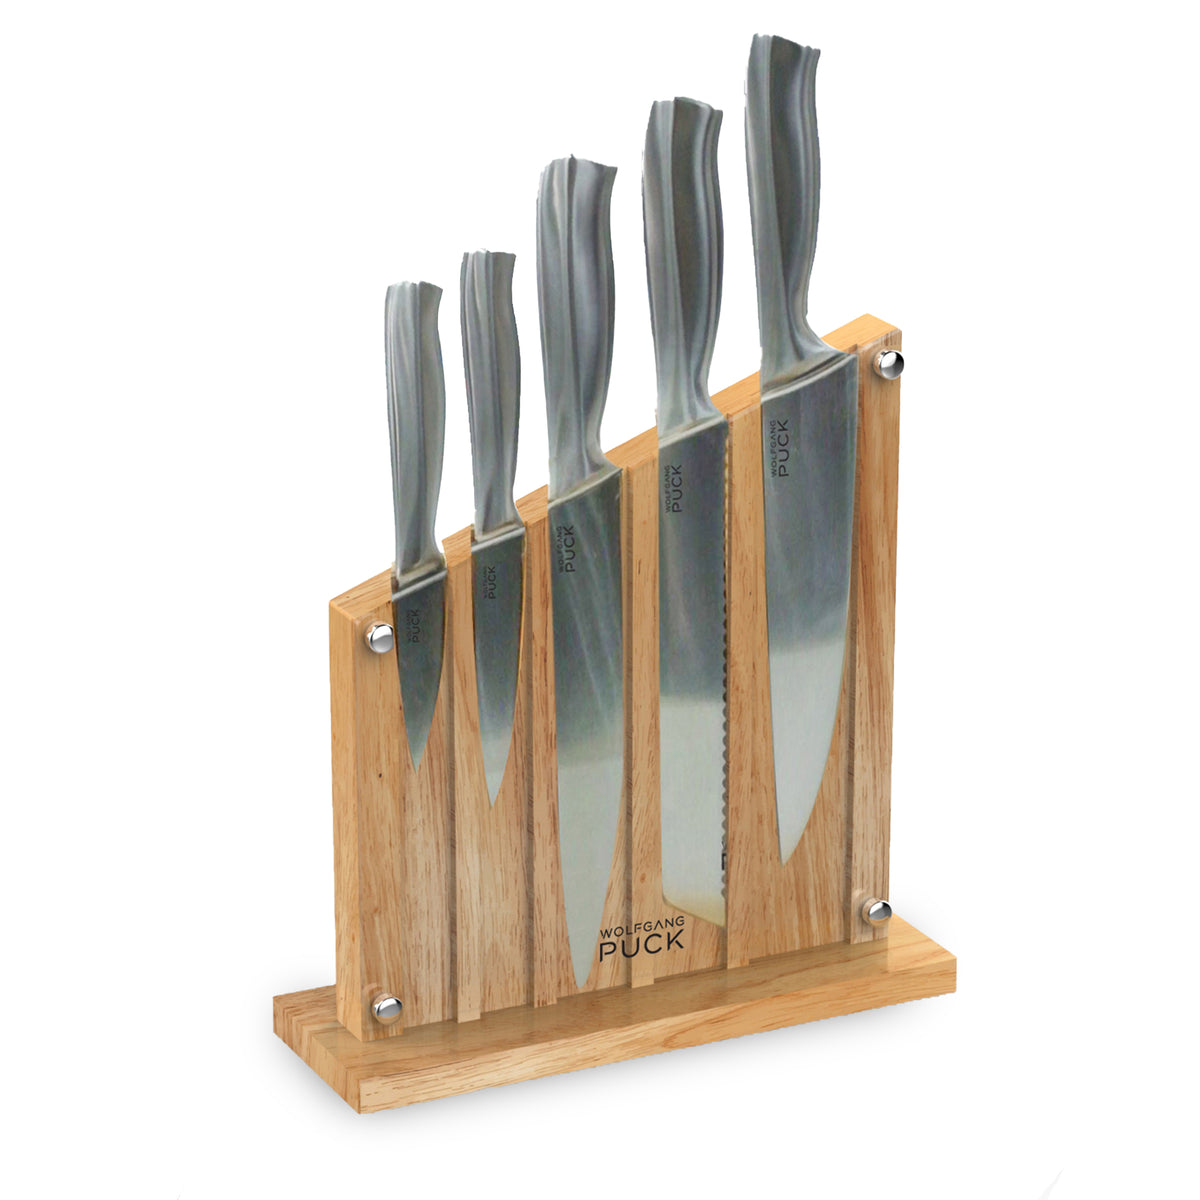 Choice 5-Piece Knife Set with Green Handles